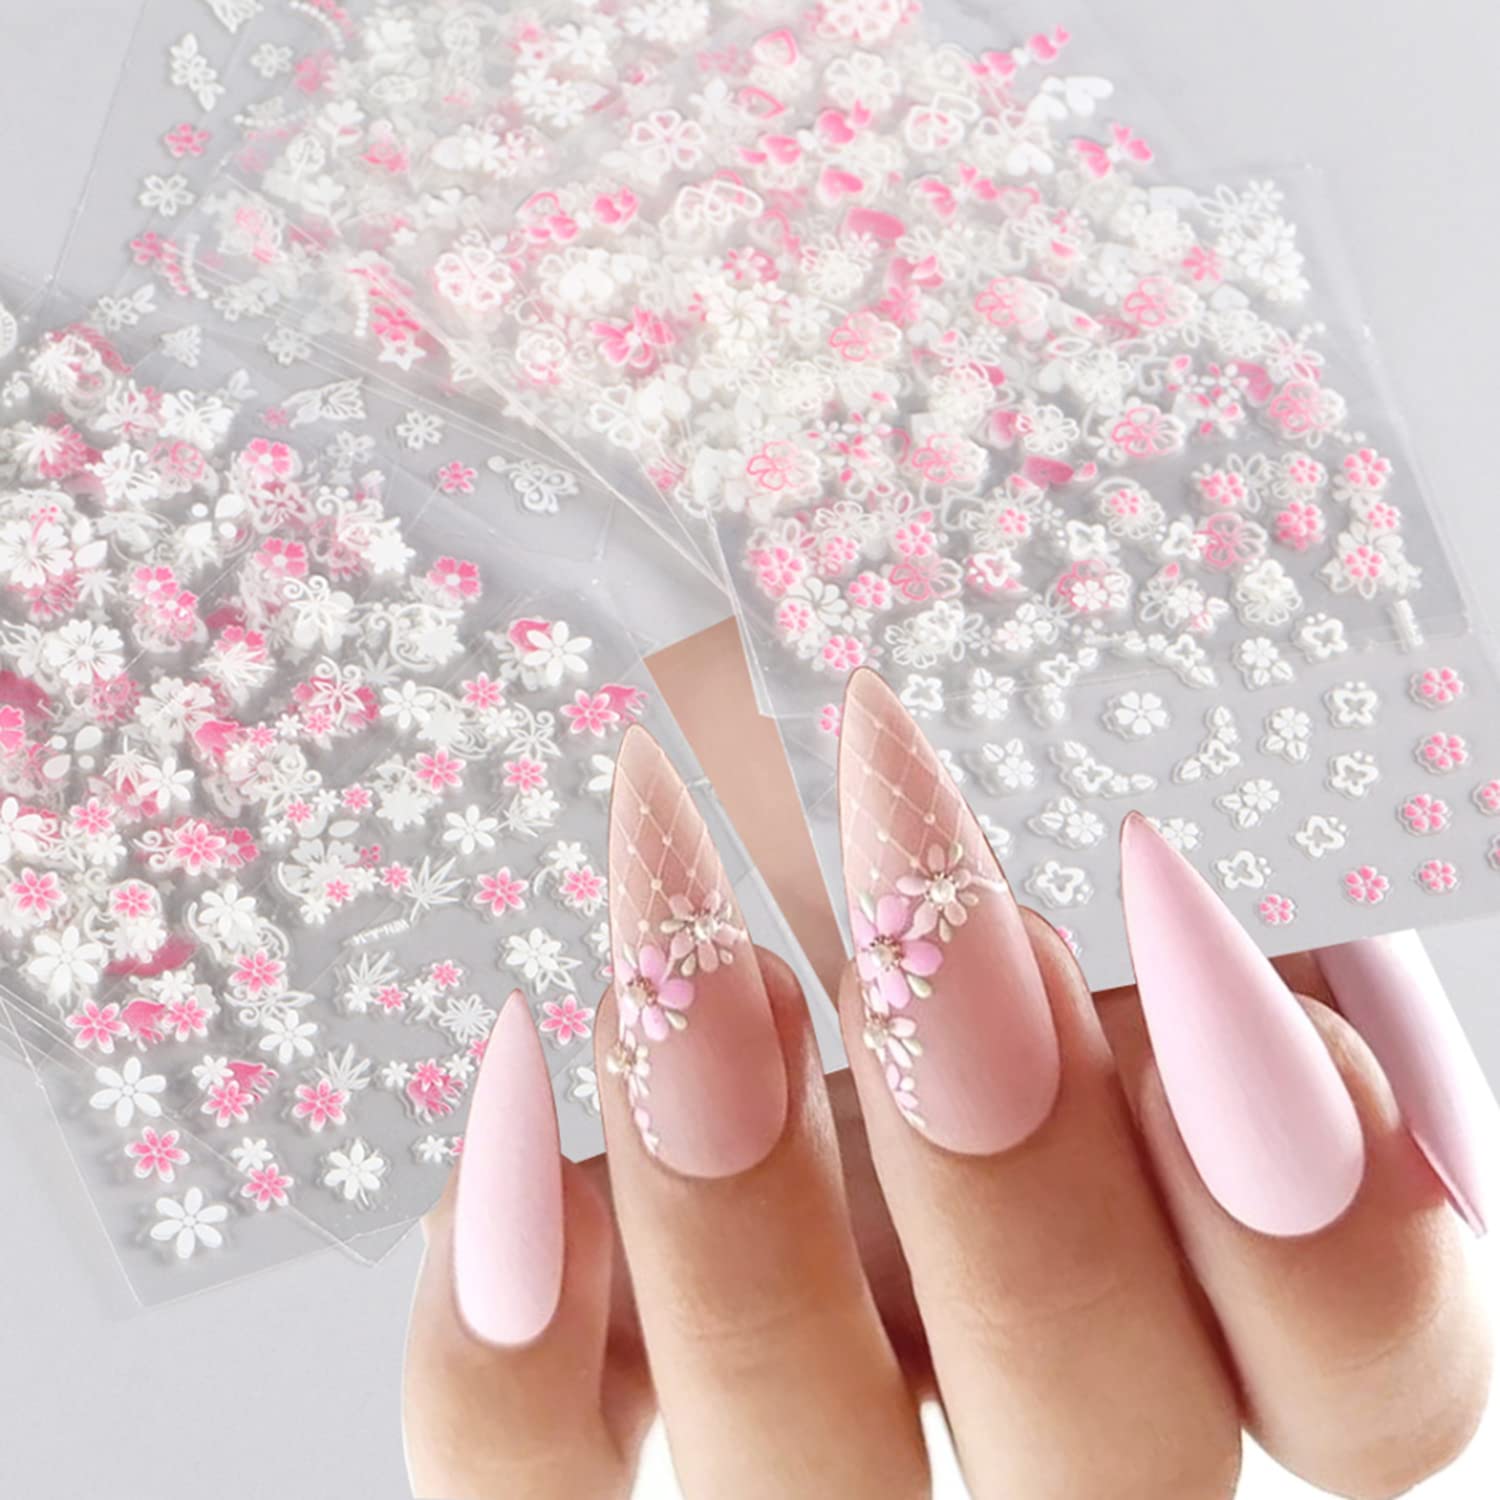 30 Playful Pink Nail Art Designs for Every Occasion : Pink & White Swirl  Nude Nails